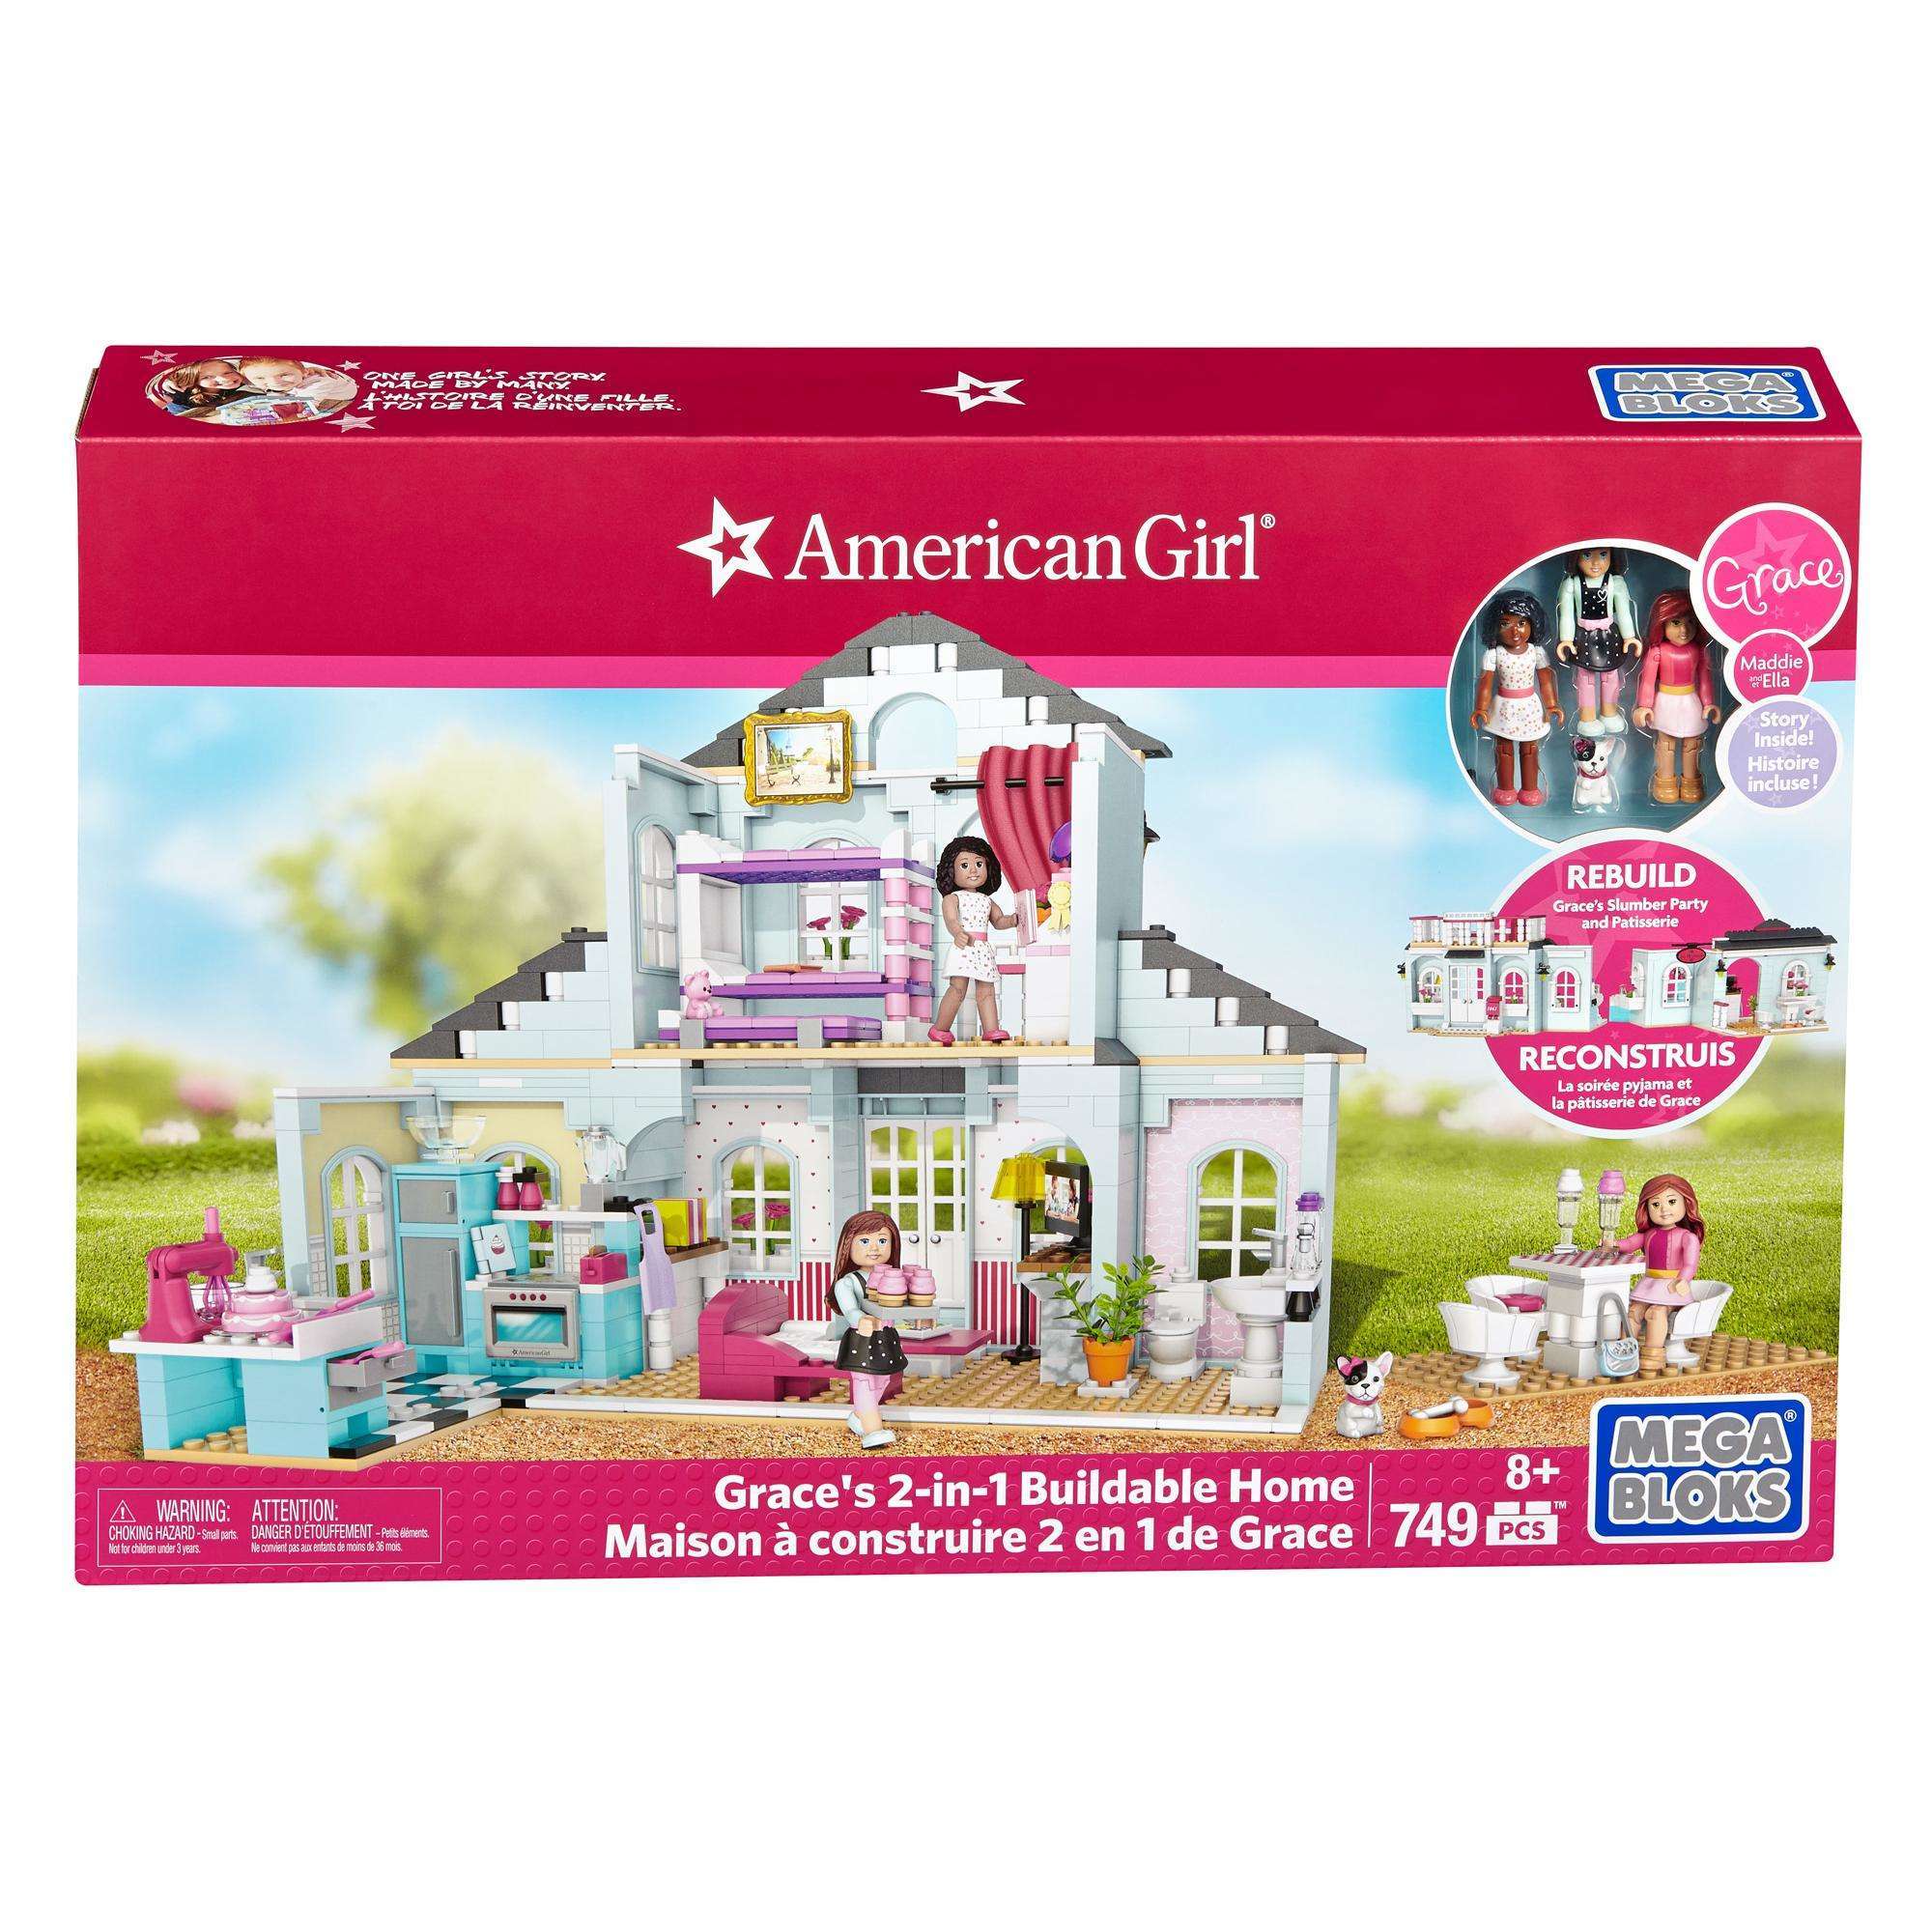 American Girl: Grace's 2-in-1 Buildable Home, 749 Pieces - image 1 of 22